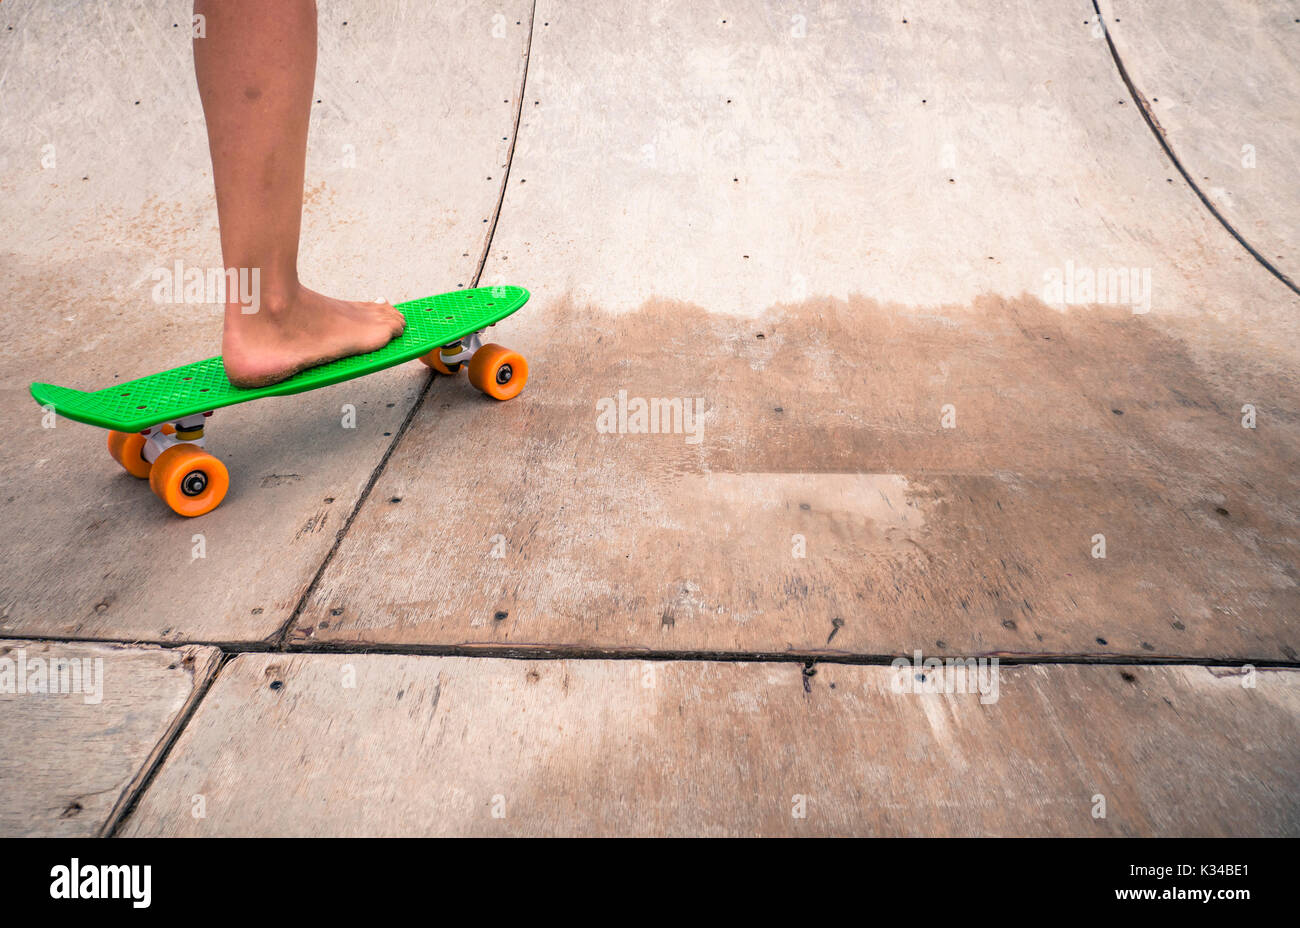 Woman riding a penny board on a wooden half-pipe. Stock Photo